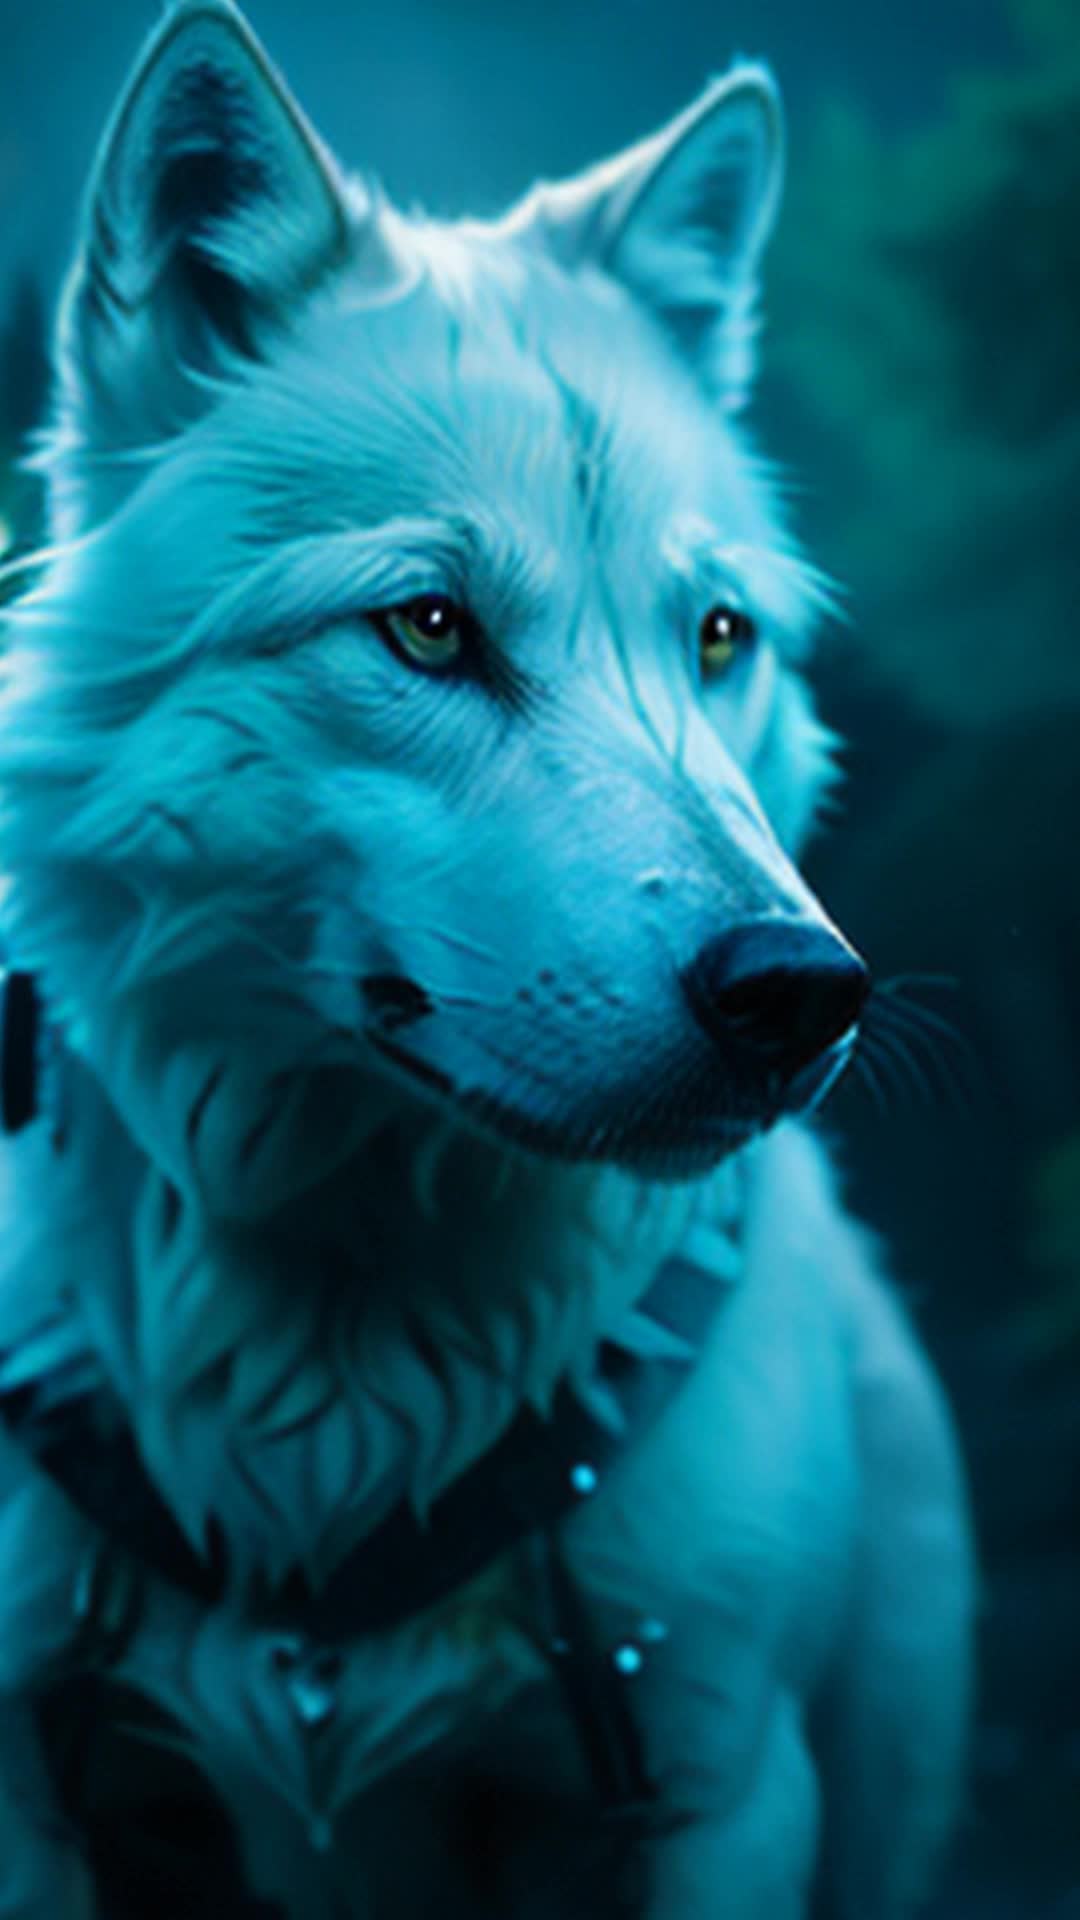 White wolf stopped, moonlight glow, ancient wisdom in the air, serene Canadian wilderness, night scene, detailed fur texture, glowing emerald eyes, mysterious atmosphere